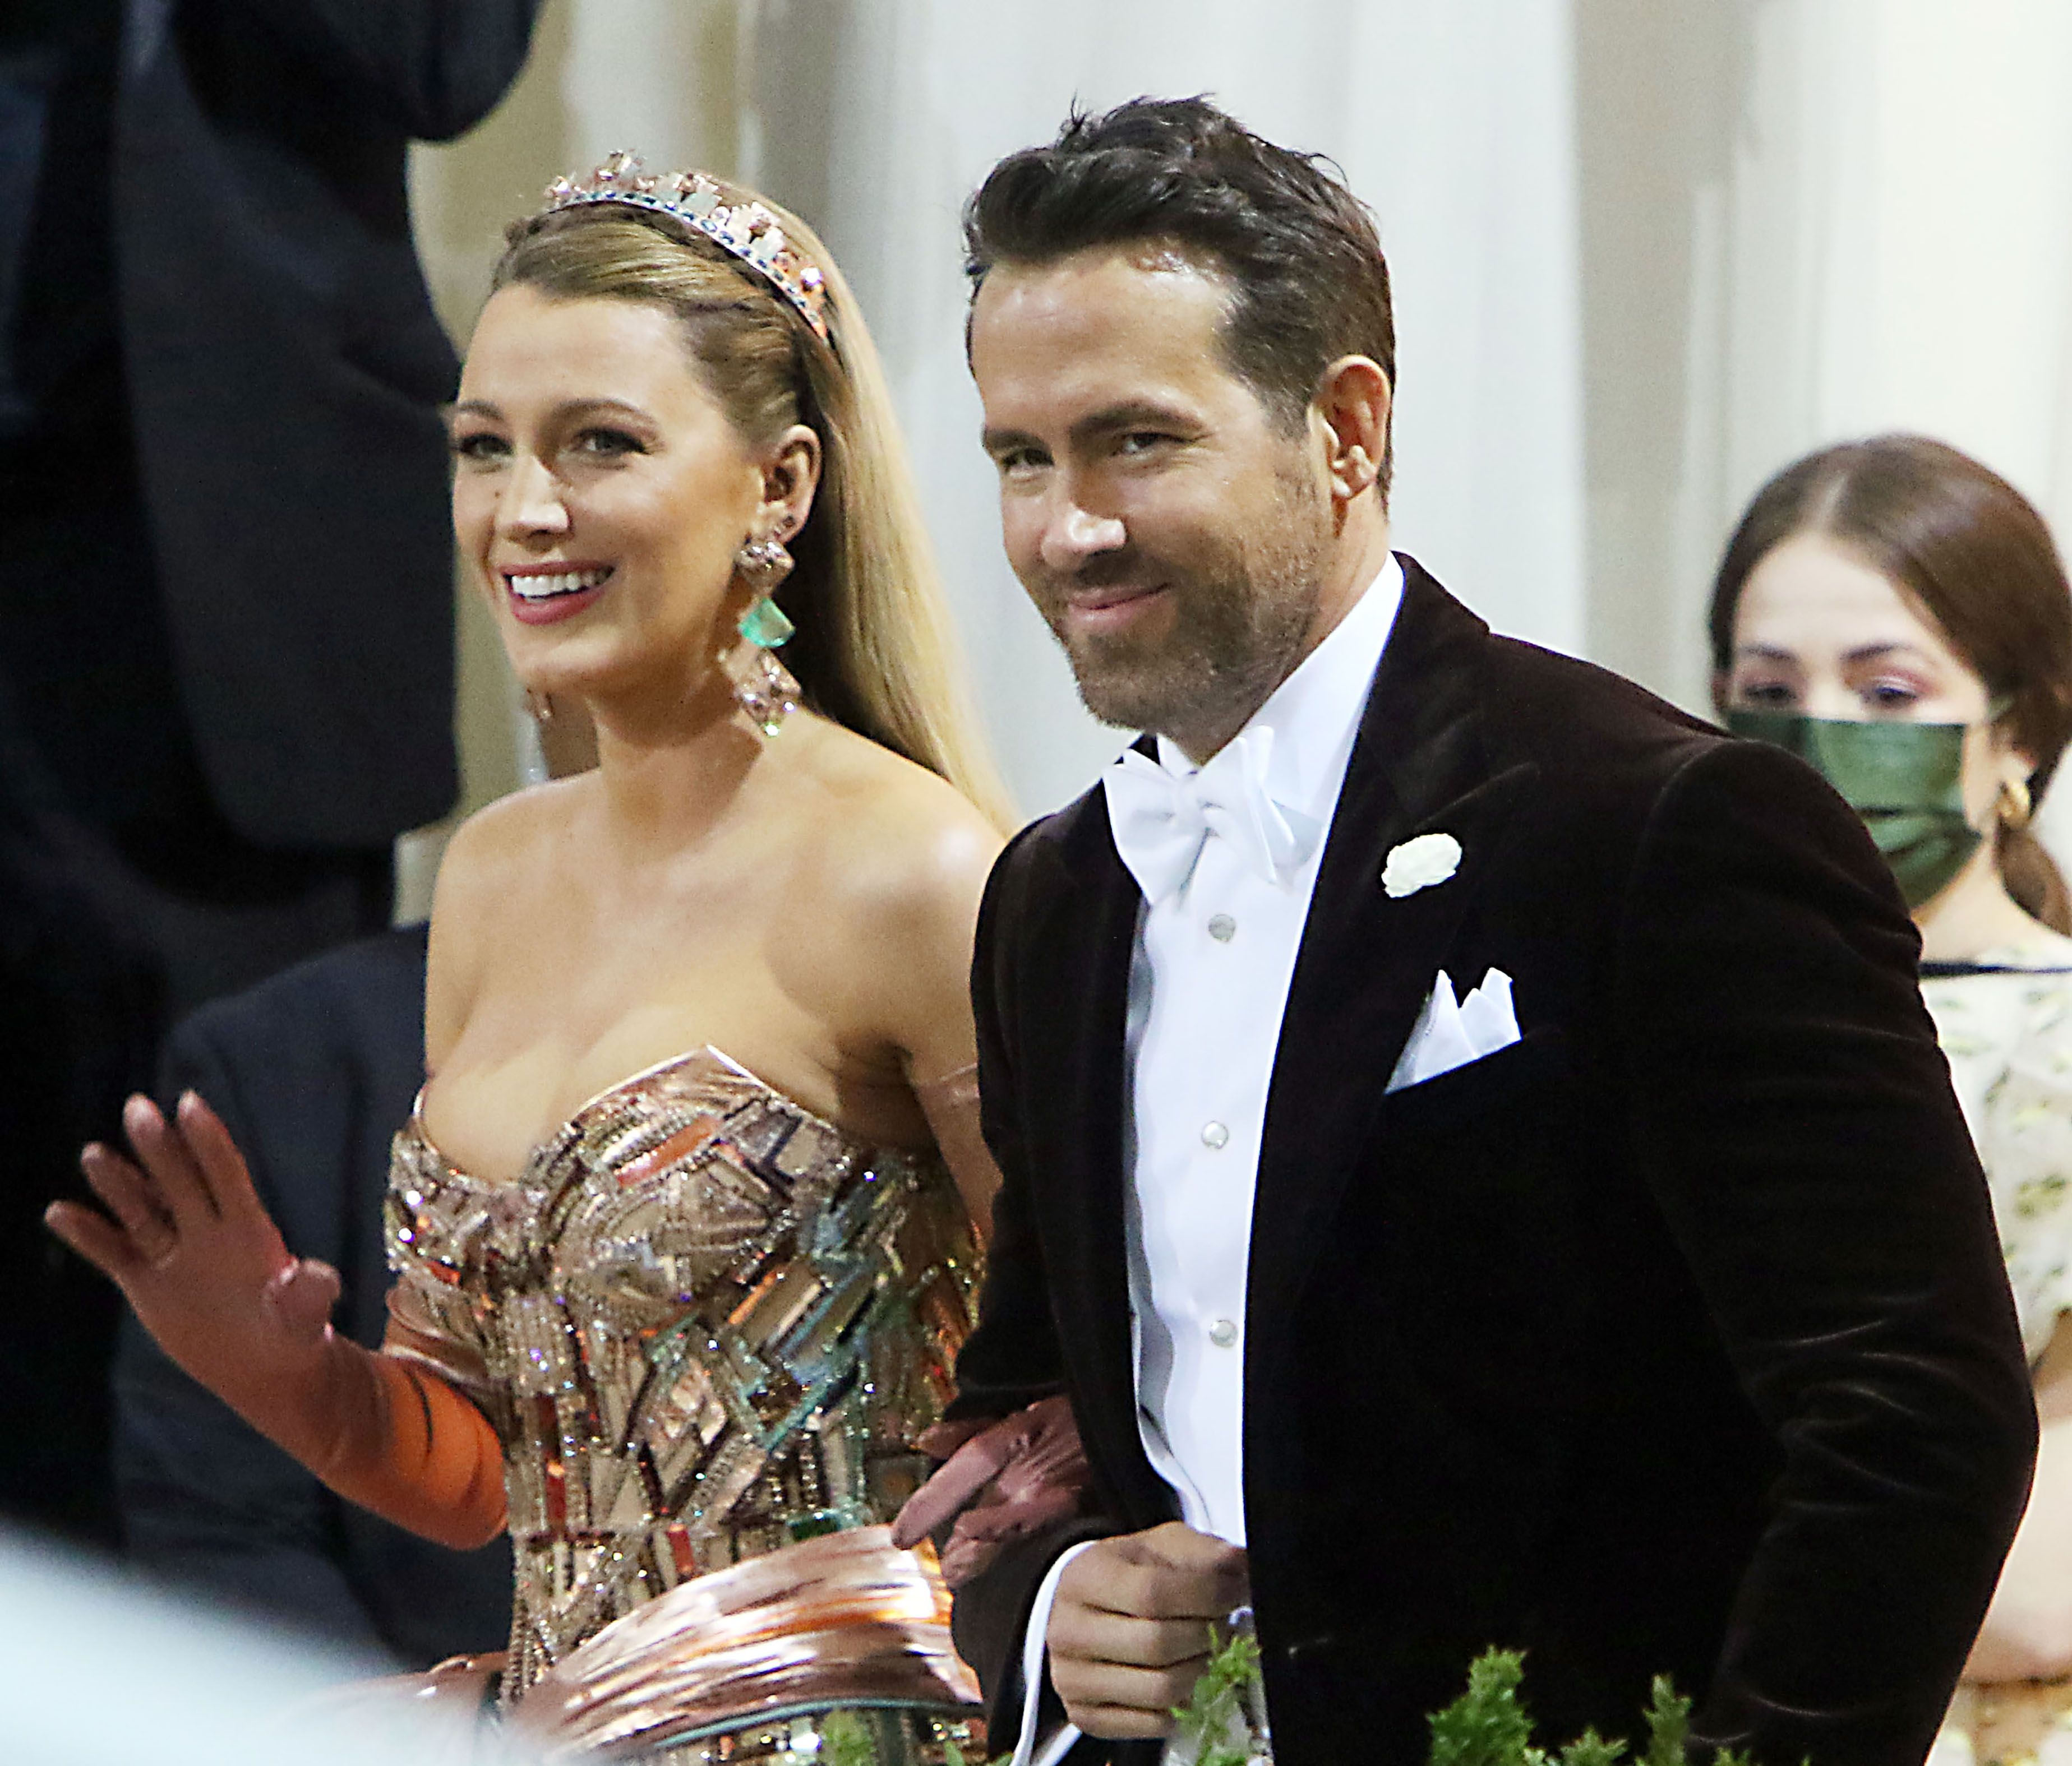 Ryan Reynolds Quit Acting, But Will Blake Lively Do The Same?